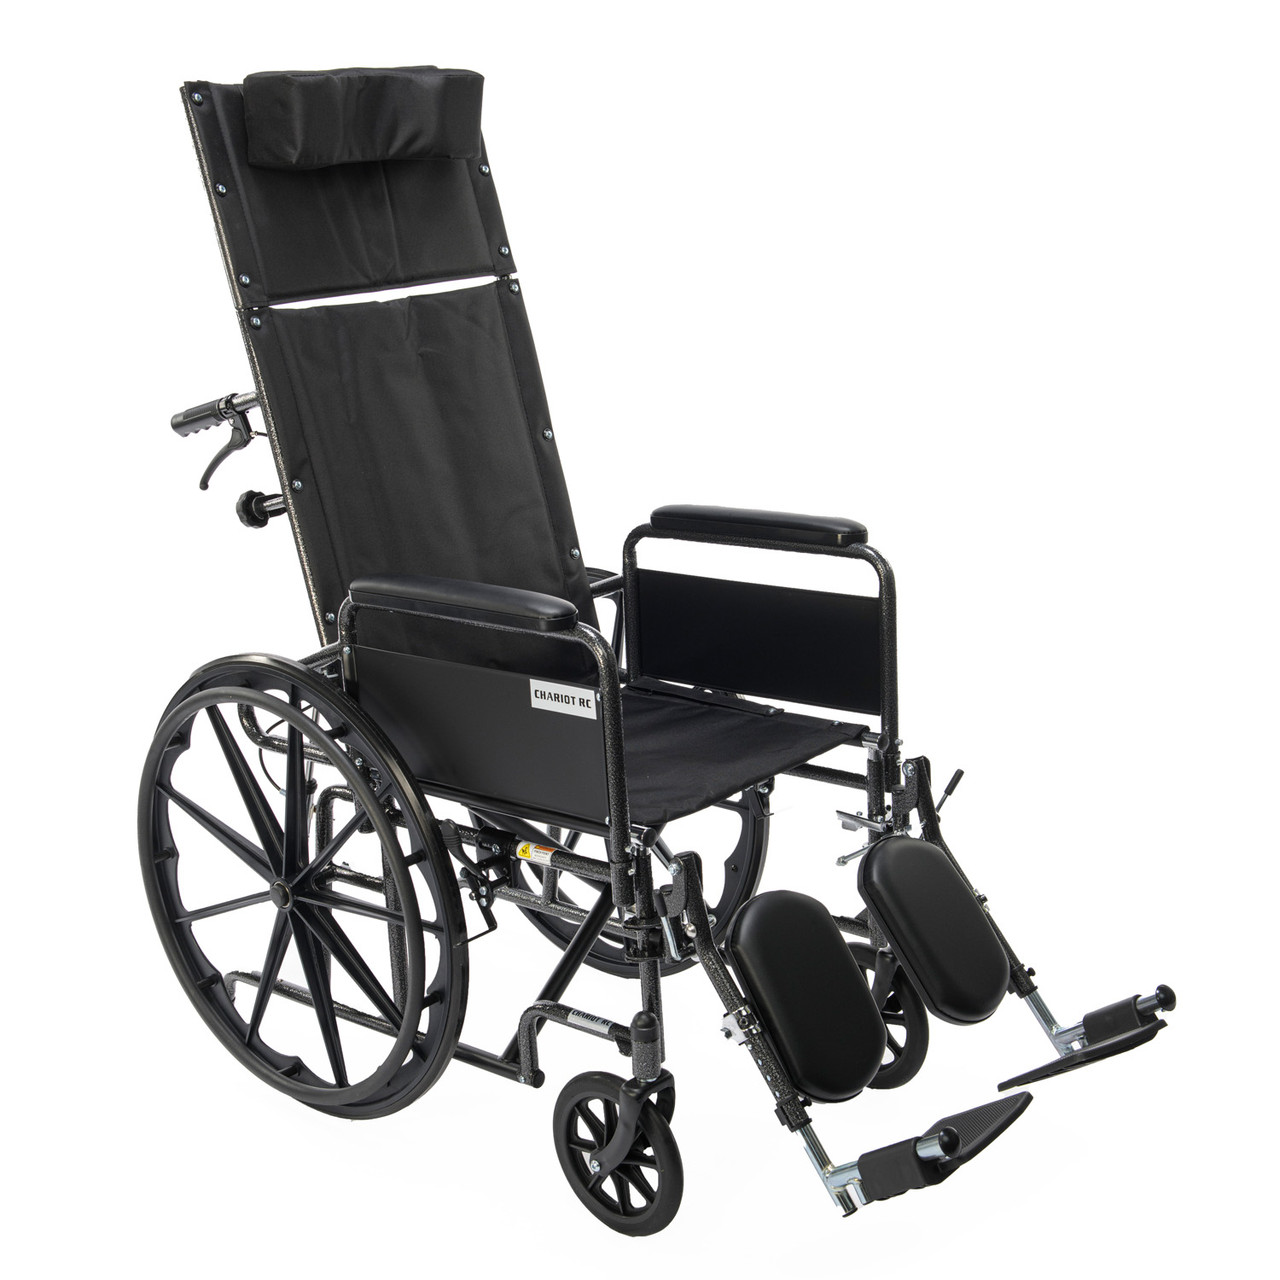 Proactive Medical Chariot-RC Reclining Wheelchair.  16" to 20"